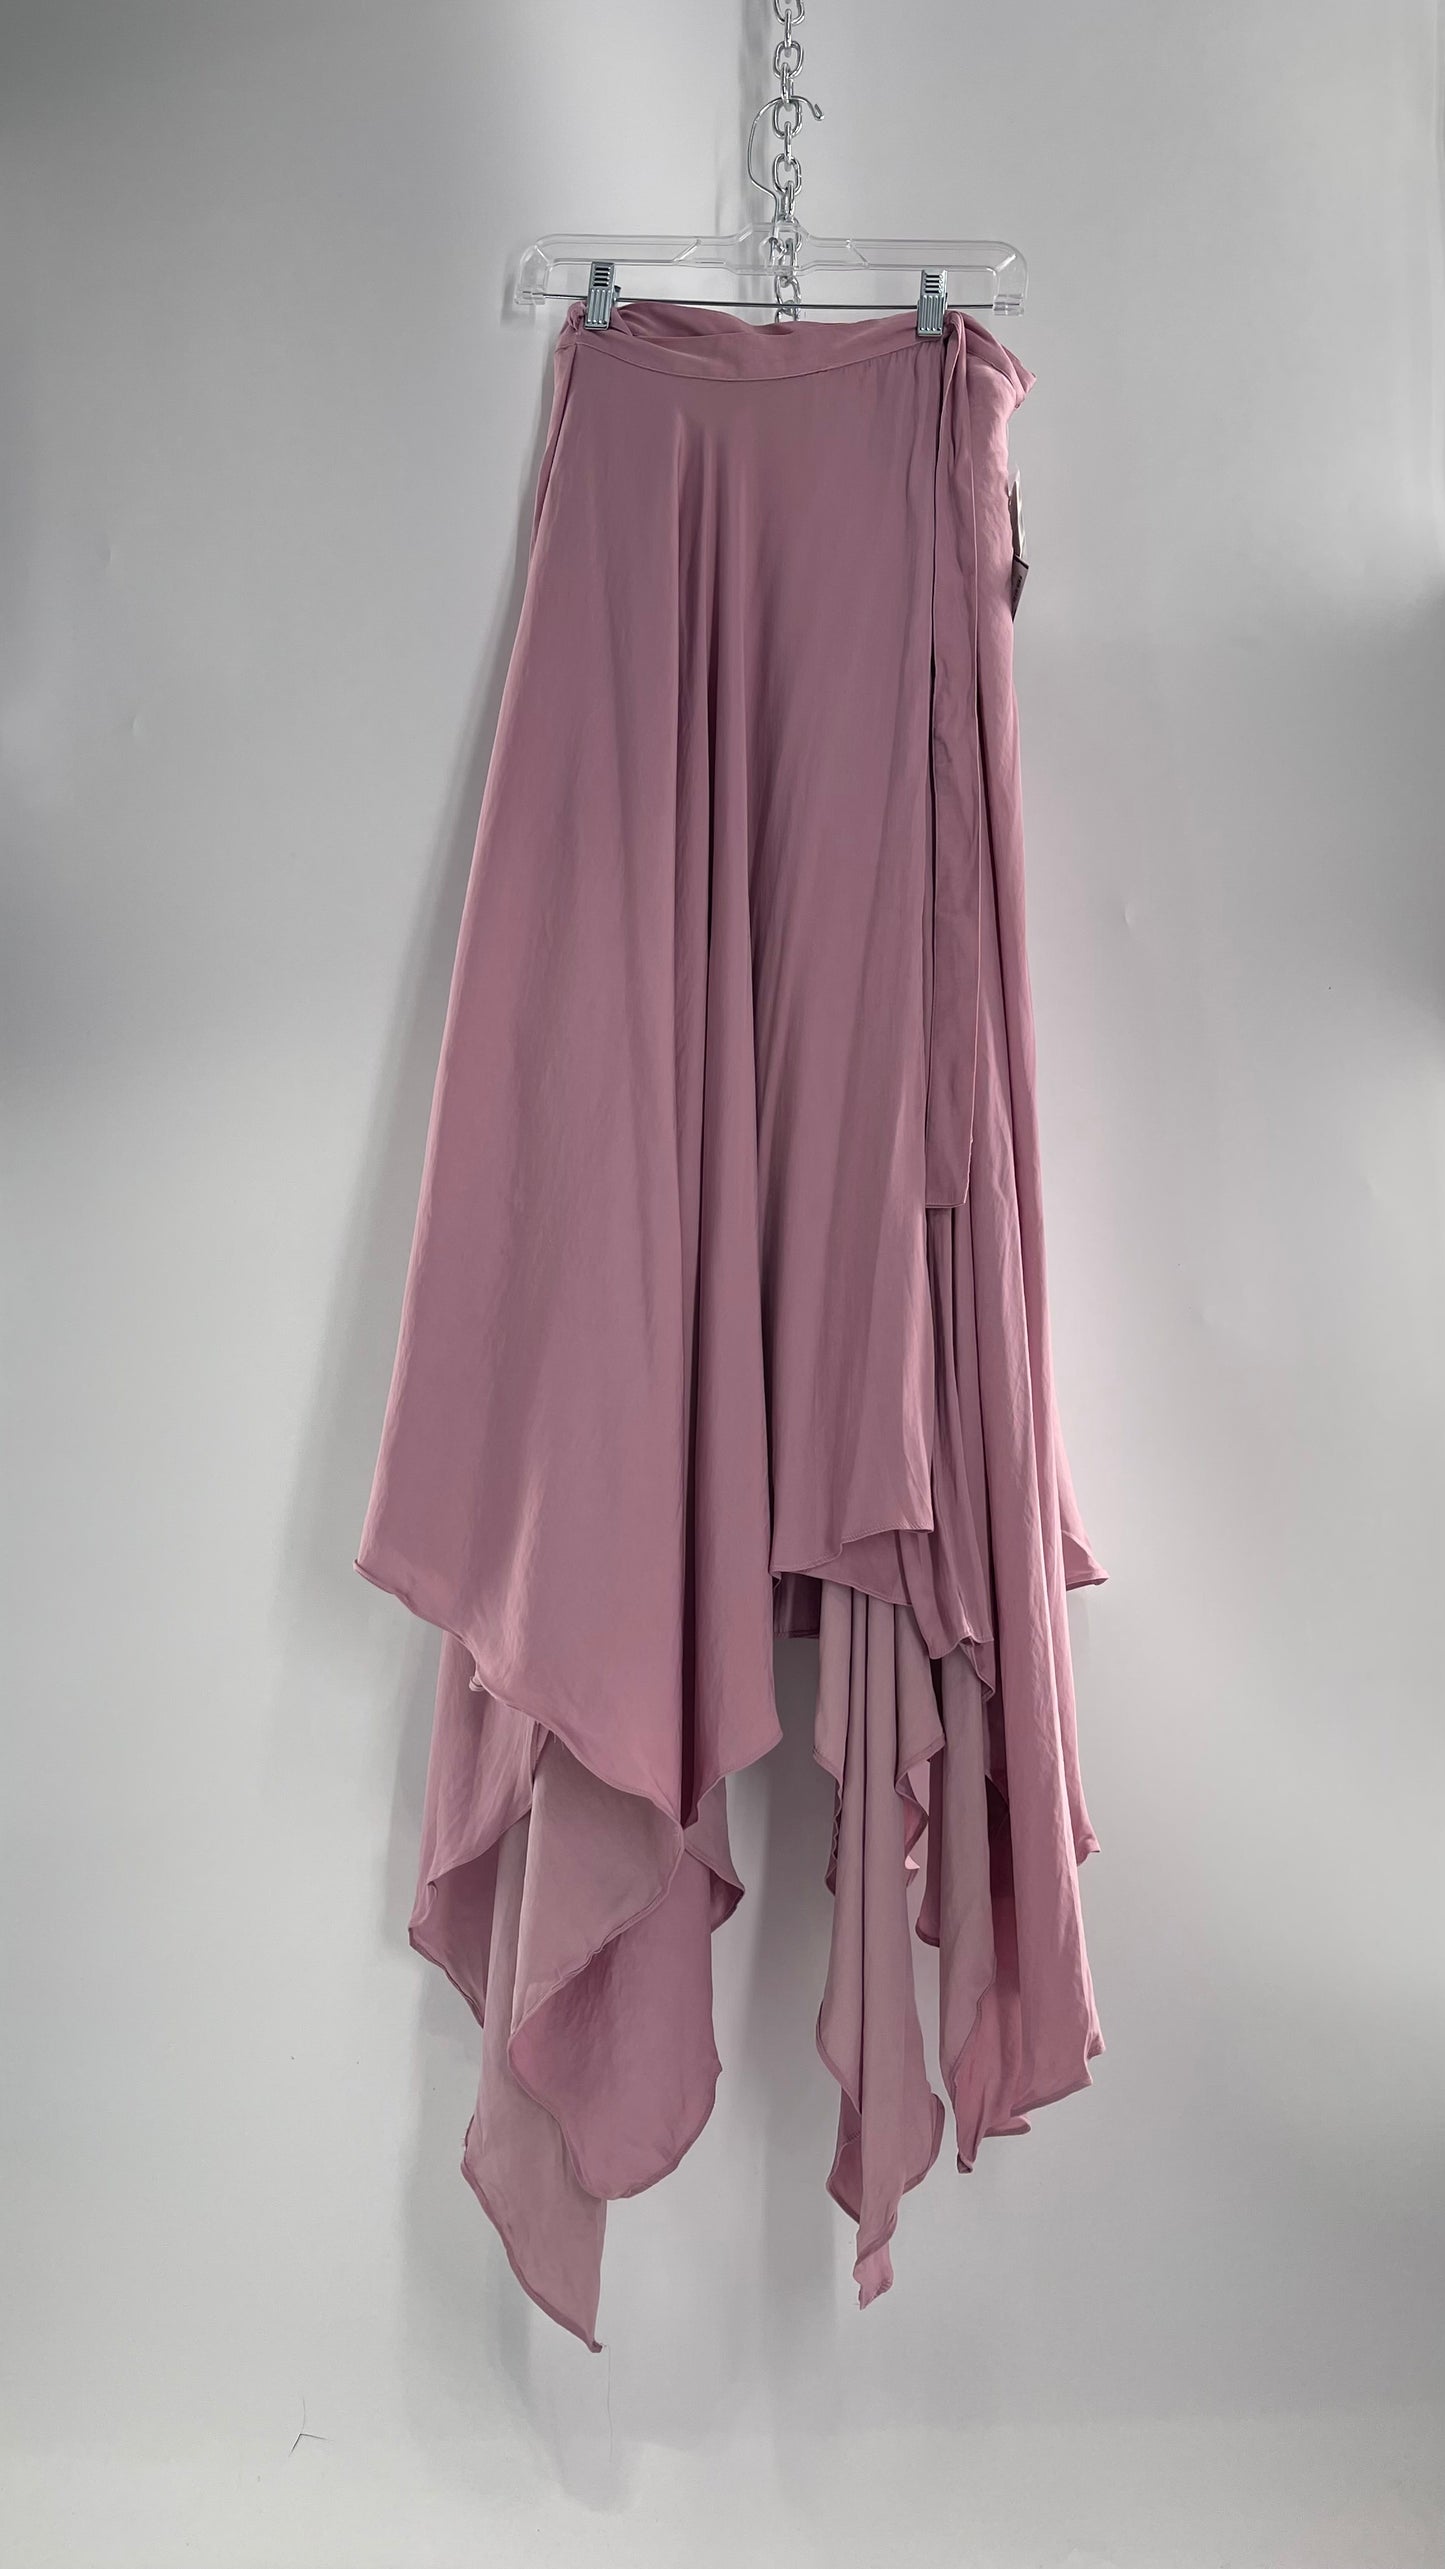 Free People Lavender Handkerchief Hem Skirt with Tags Attached (Medium)